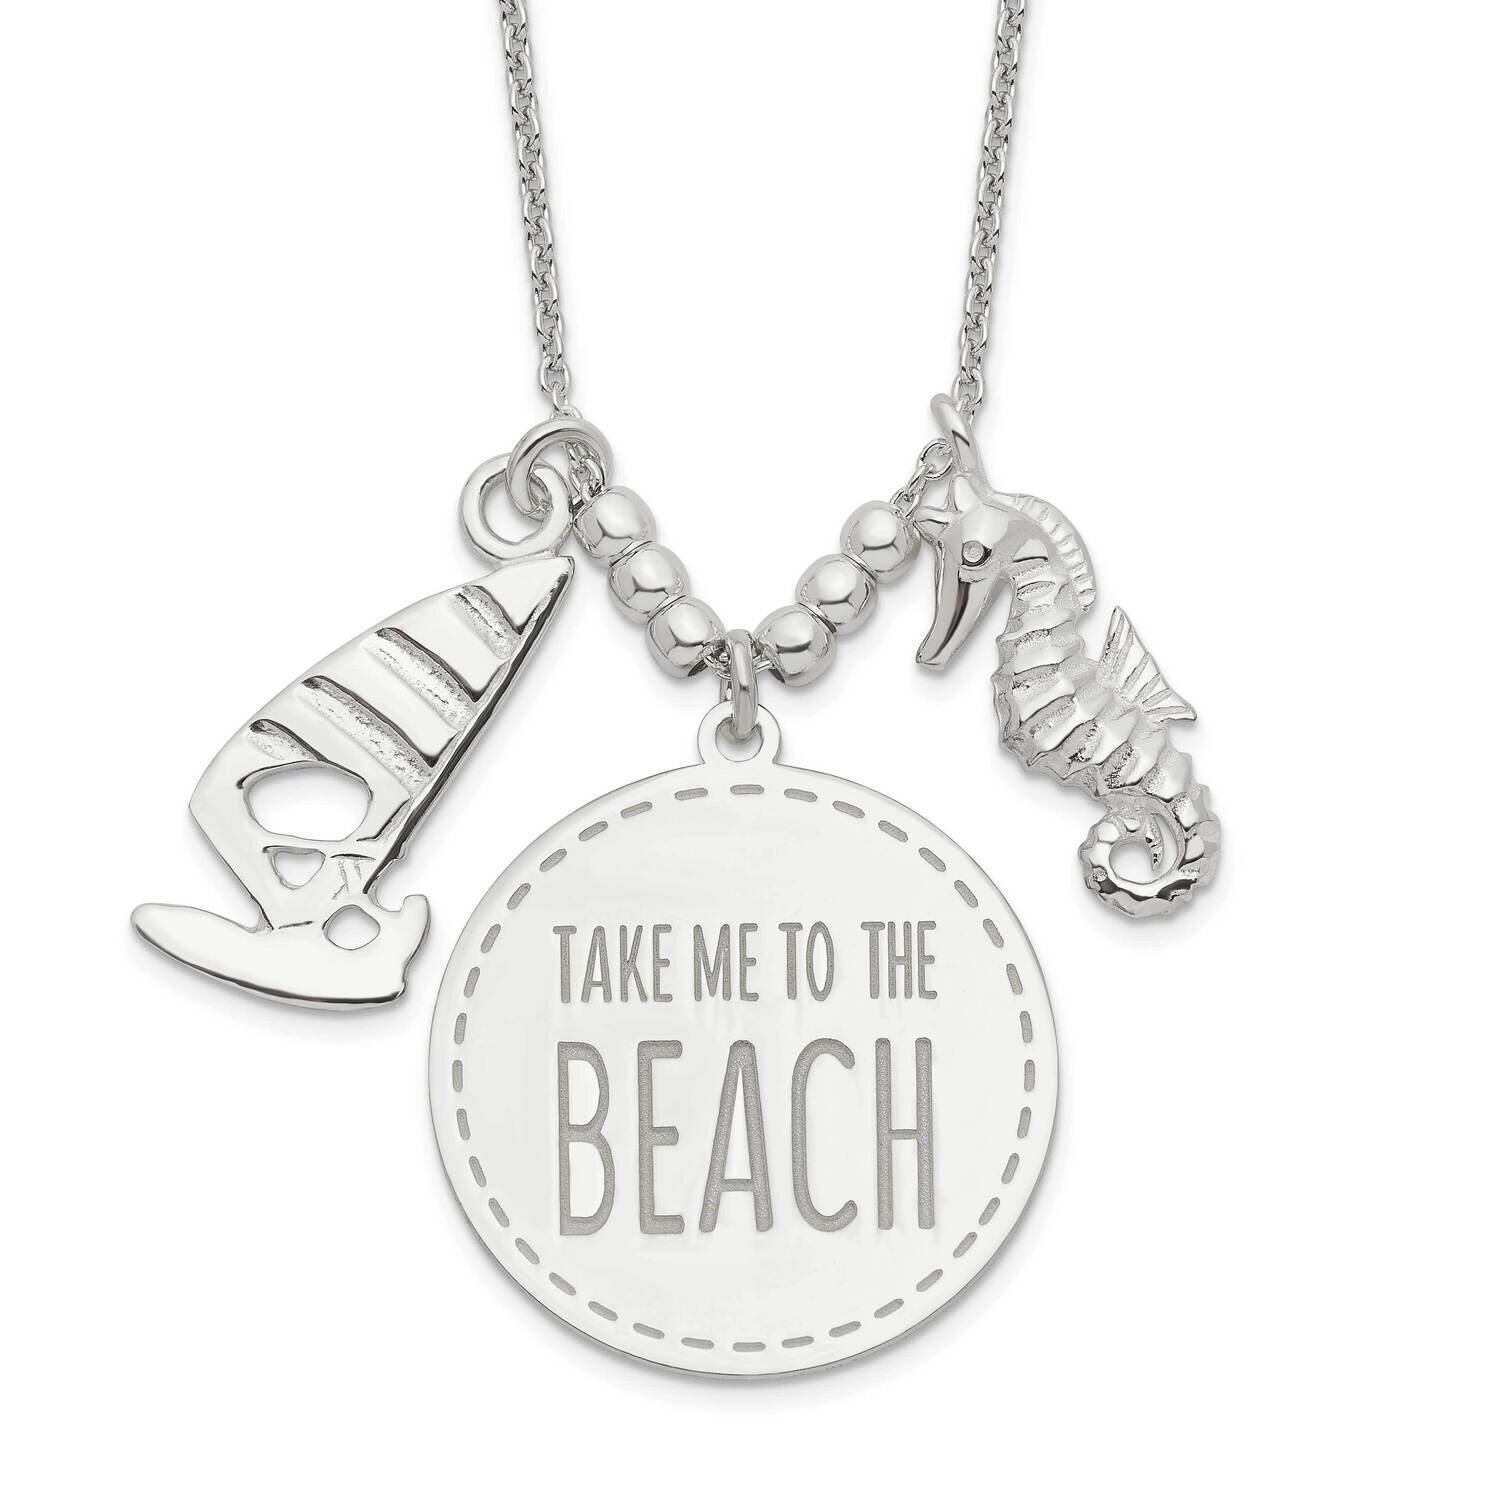 Take Me To The Beach Necklace 16 Inch Sterling Silver QG6173-16